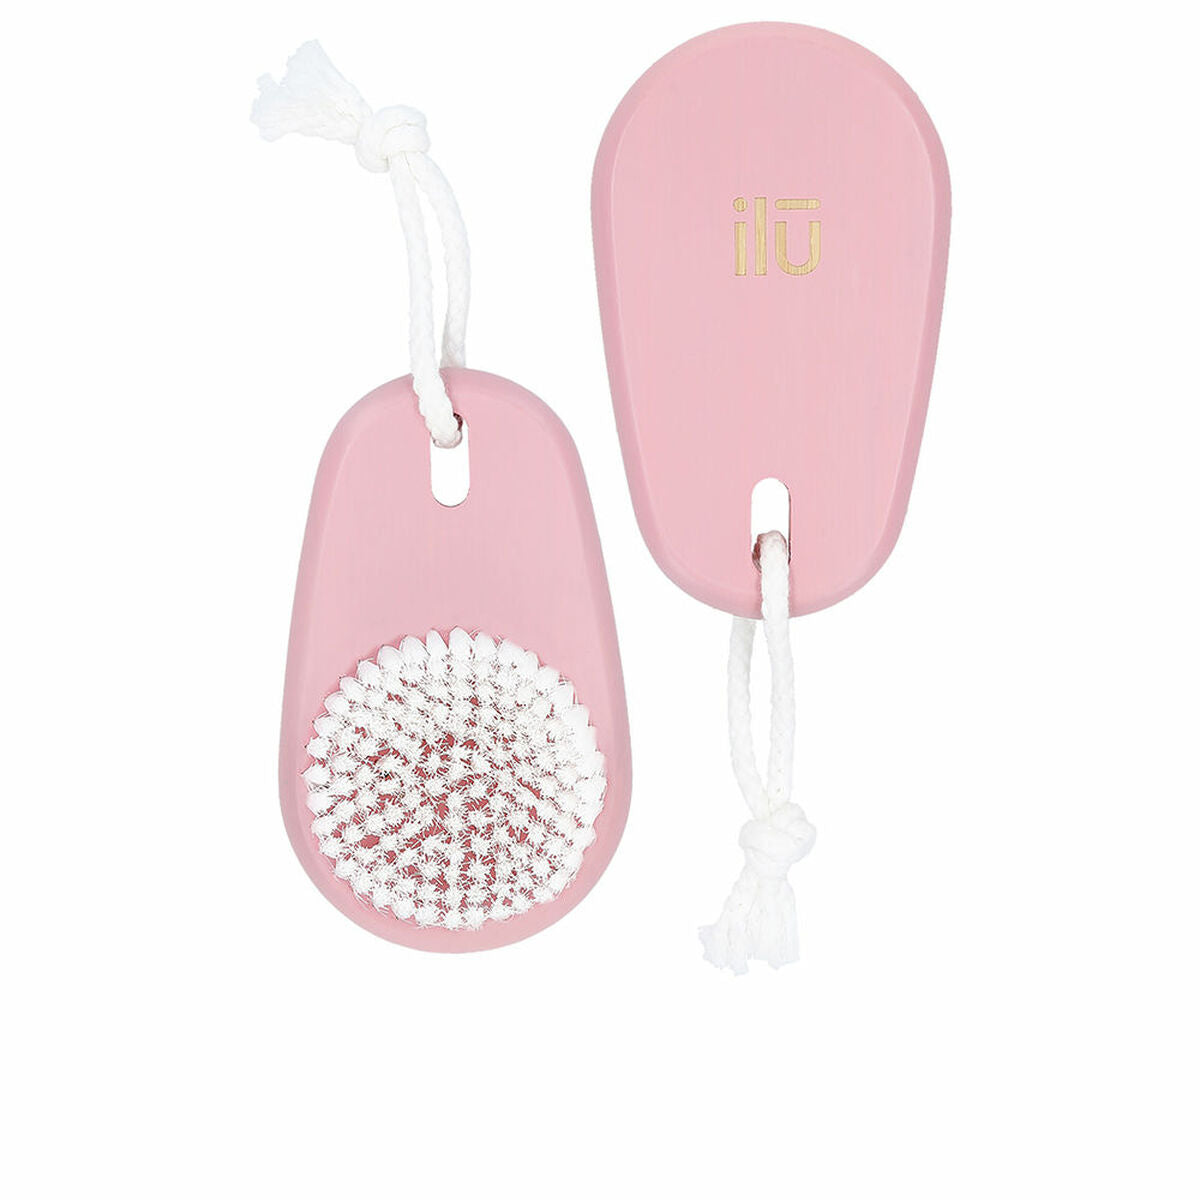 Cleansing and Exfoliating Brush Ilū BambooM! Pink